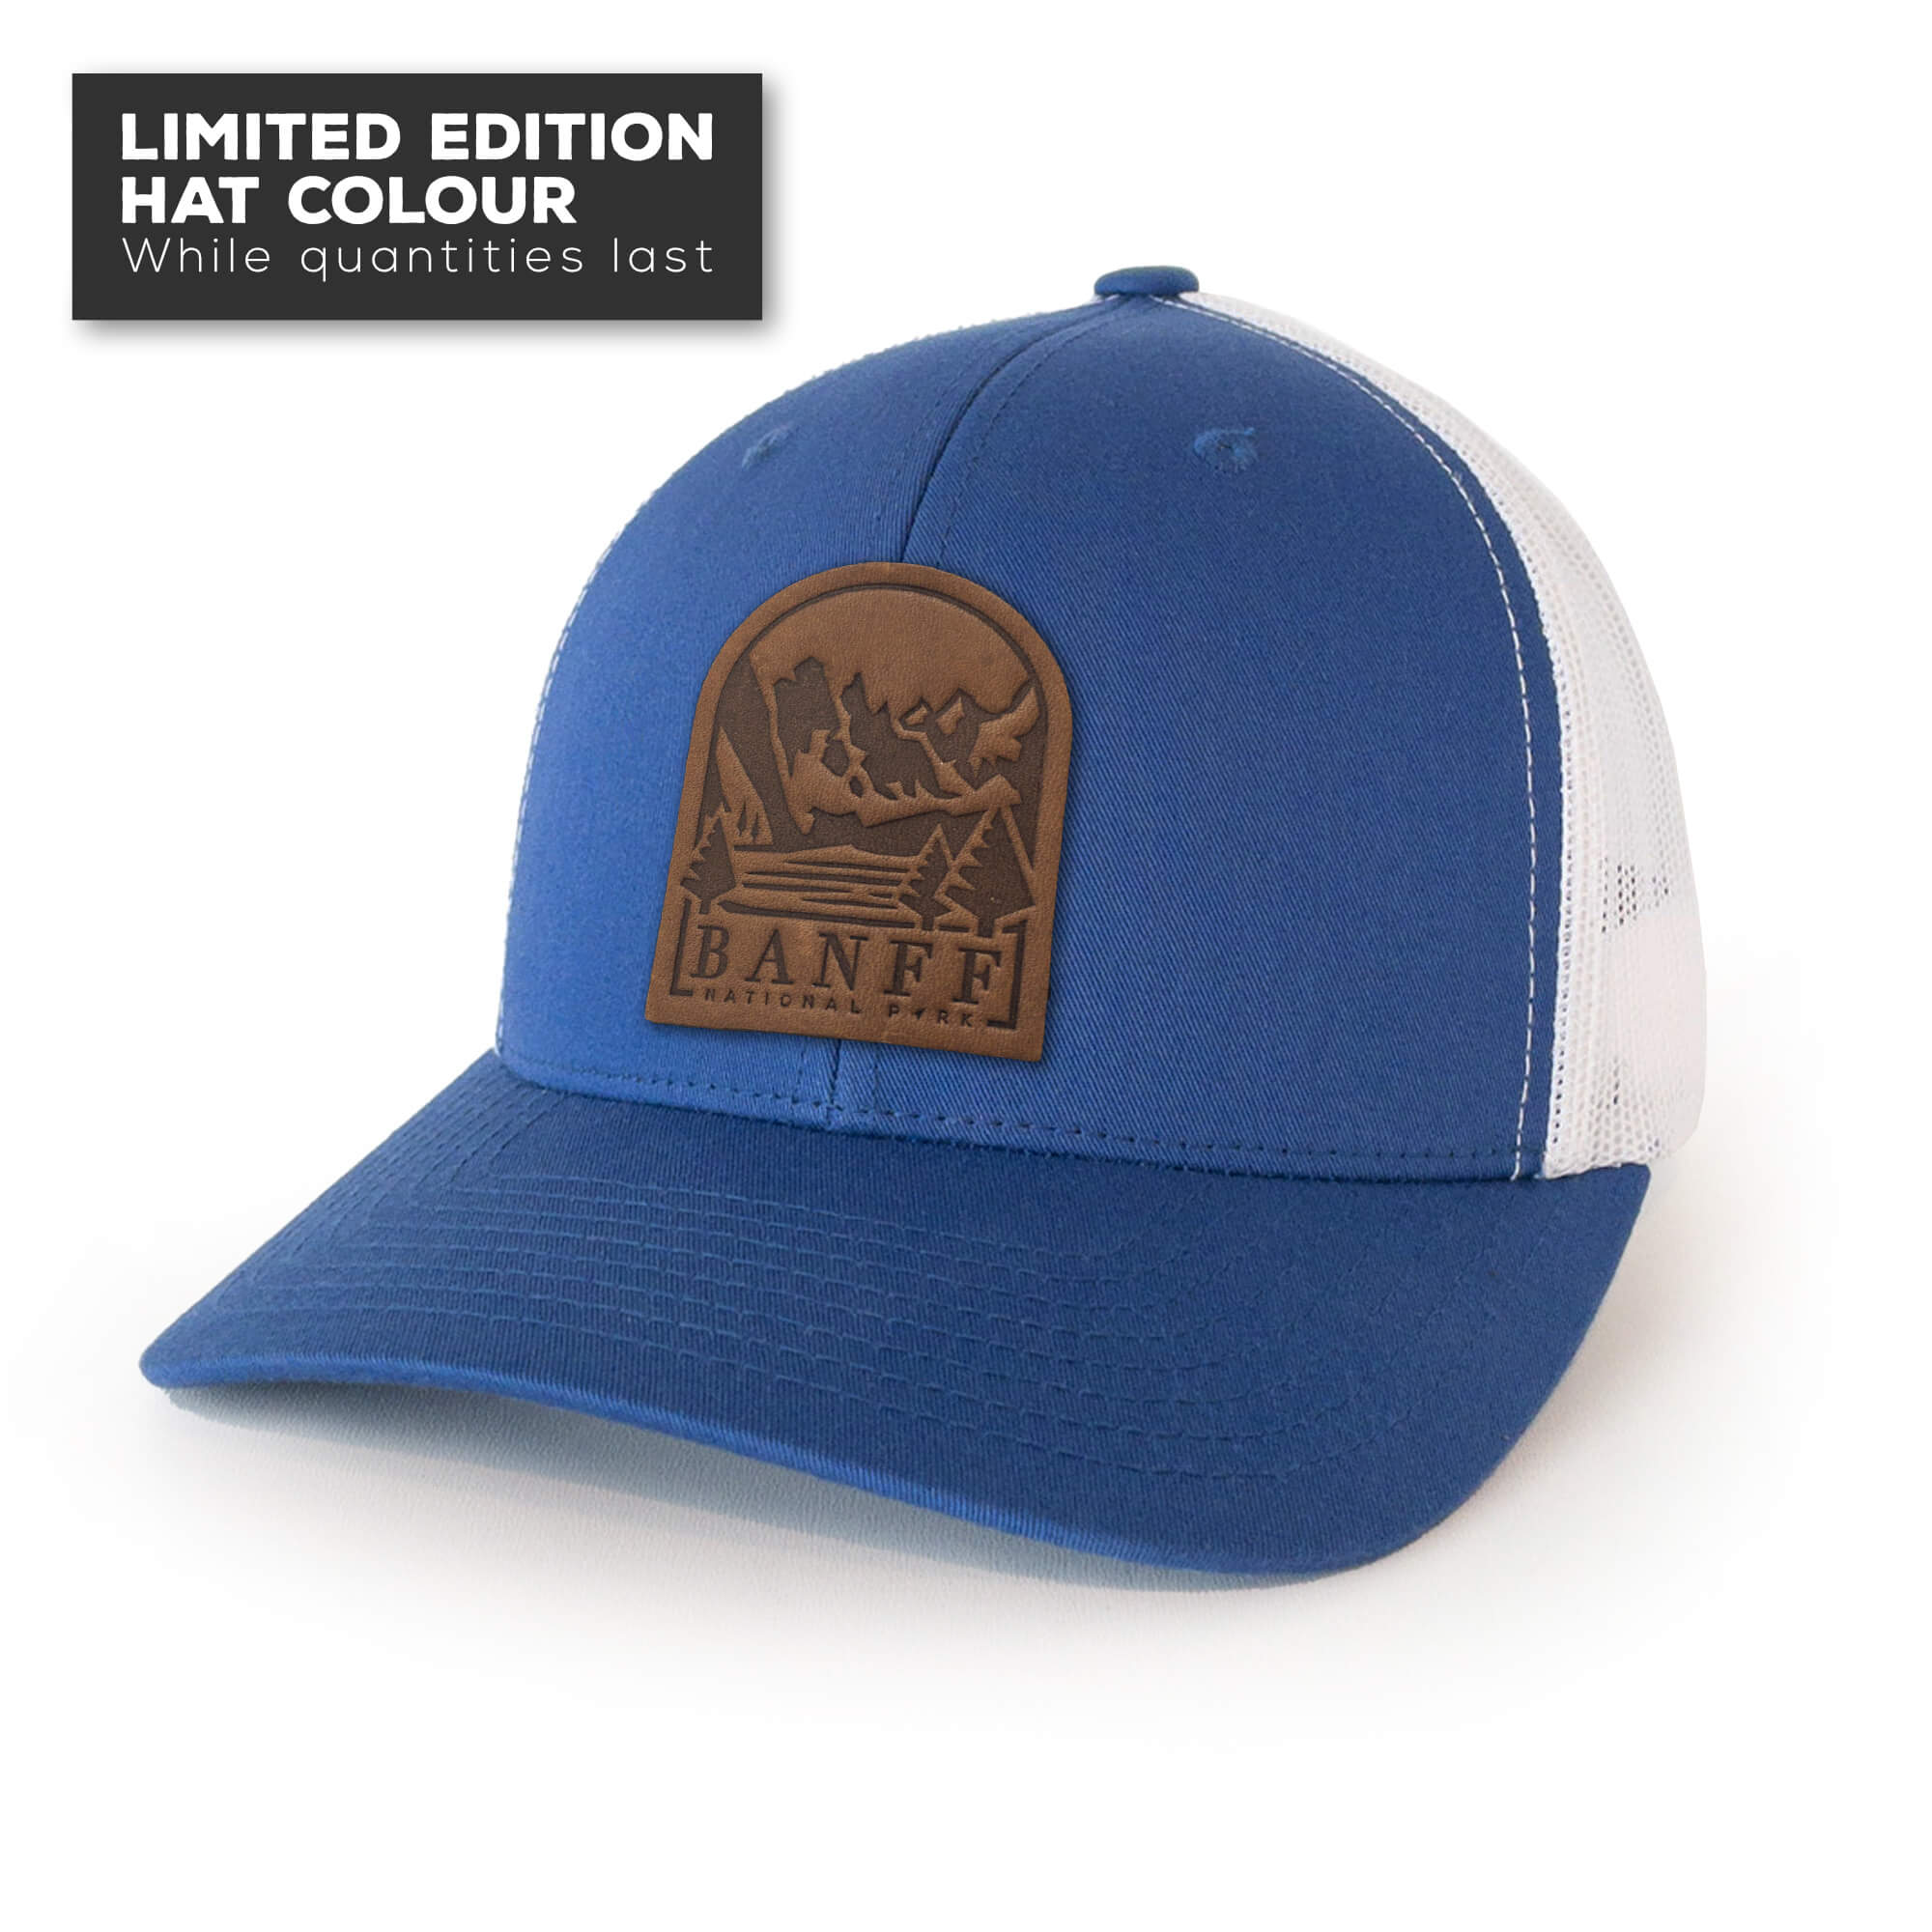 Royal Blue trucker hat with full-grain leather patch of Banff